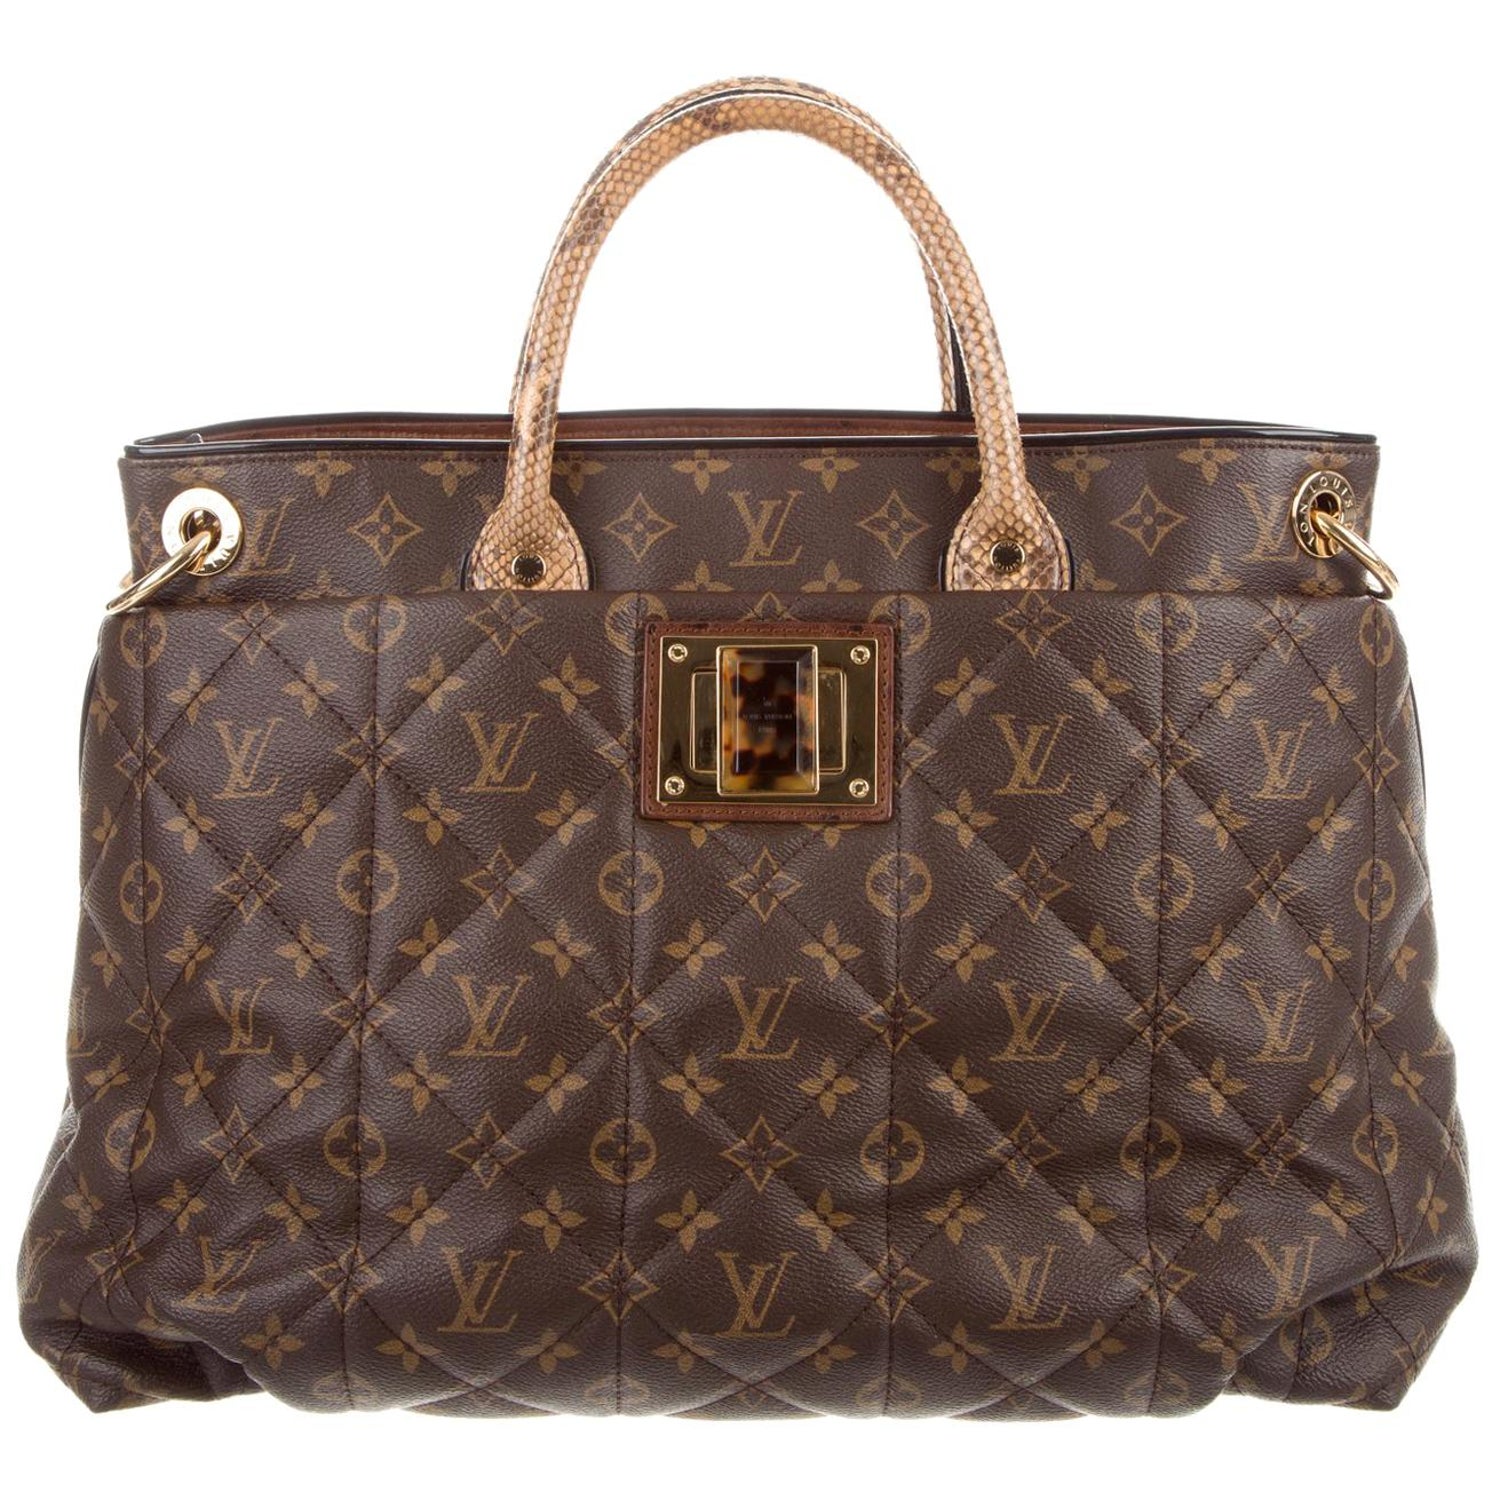 Louis Vuitton Men Tote Bag - 2 For Sale on 1stDibs